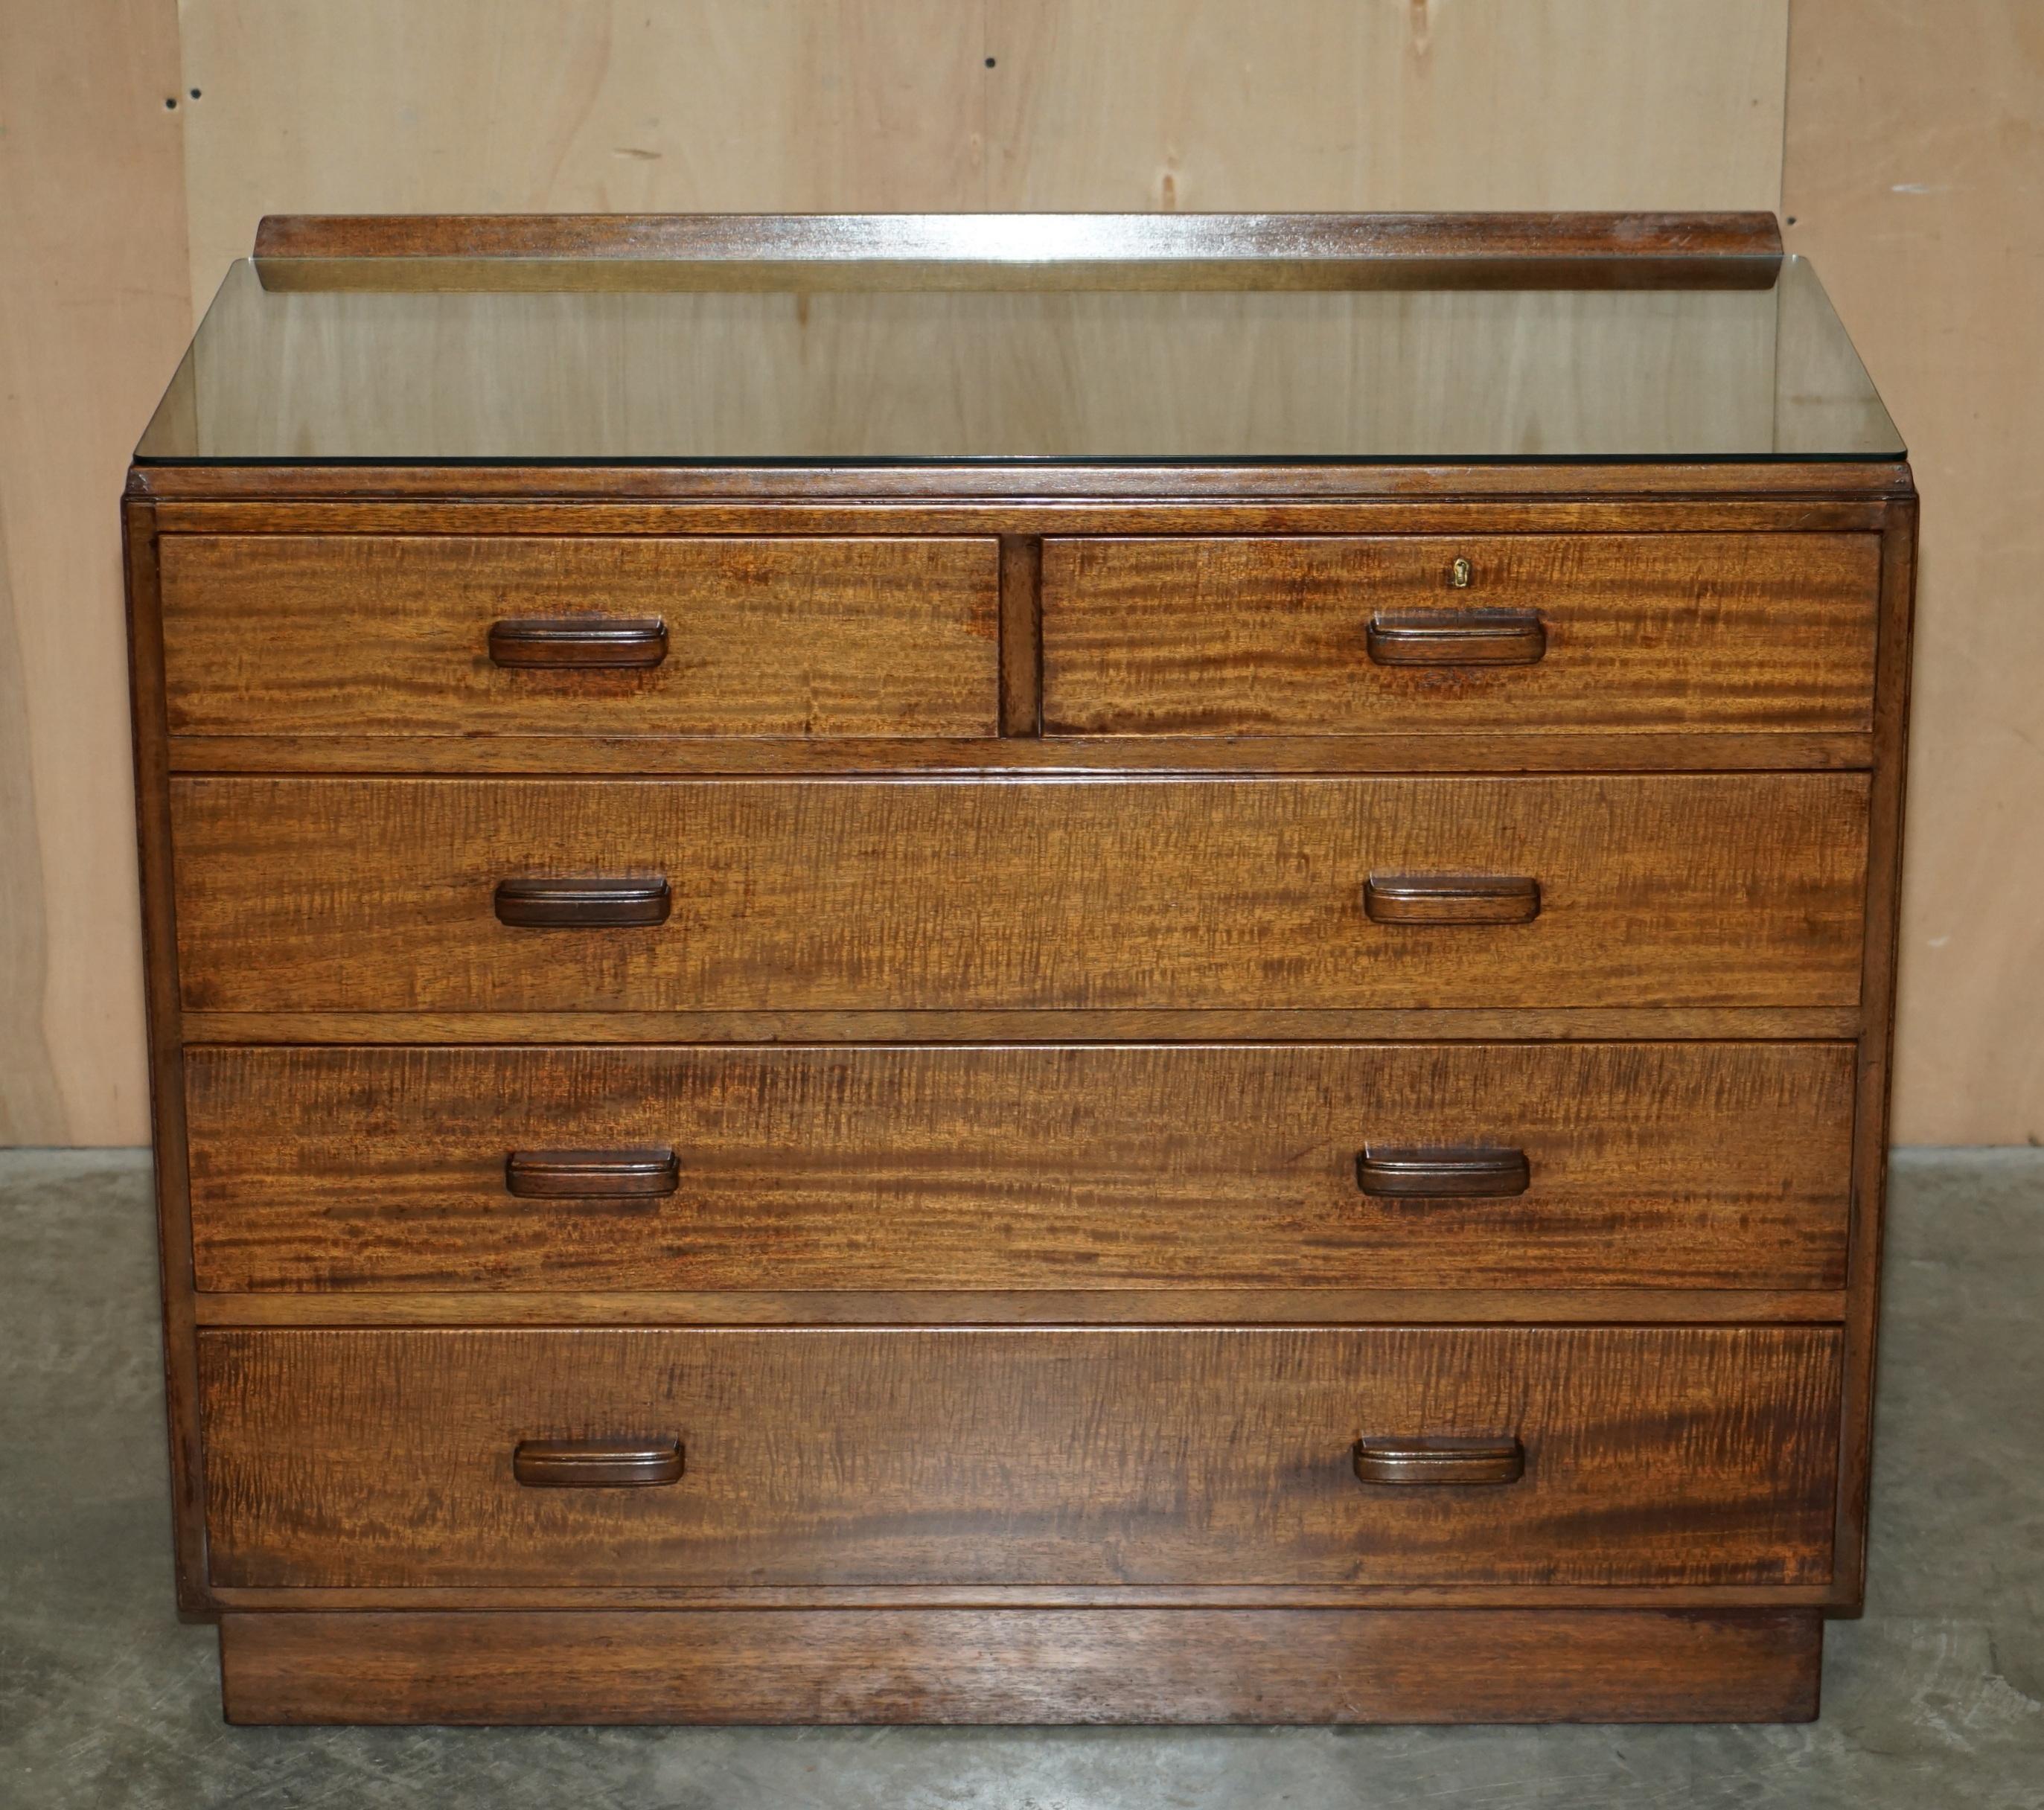 We are delighted to offer for sale this stunning original Alfred Cox circa 1952 Mid-Century Modern chests of drawers which are part of a suite.

This is a very well made chest, a very good size with a glass top and small lip at the back, the other